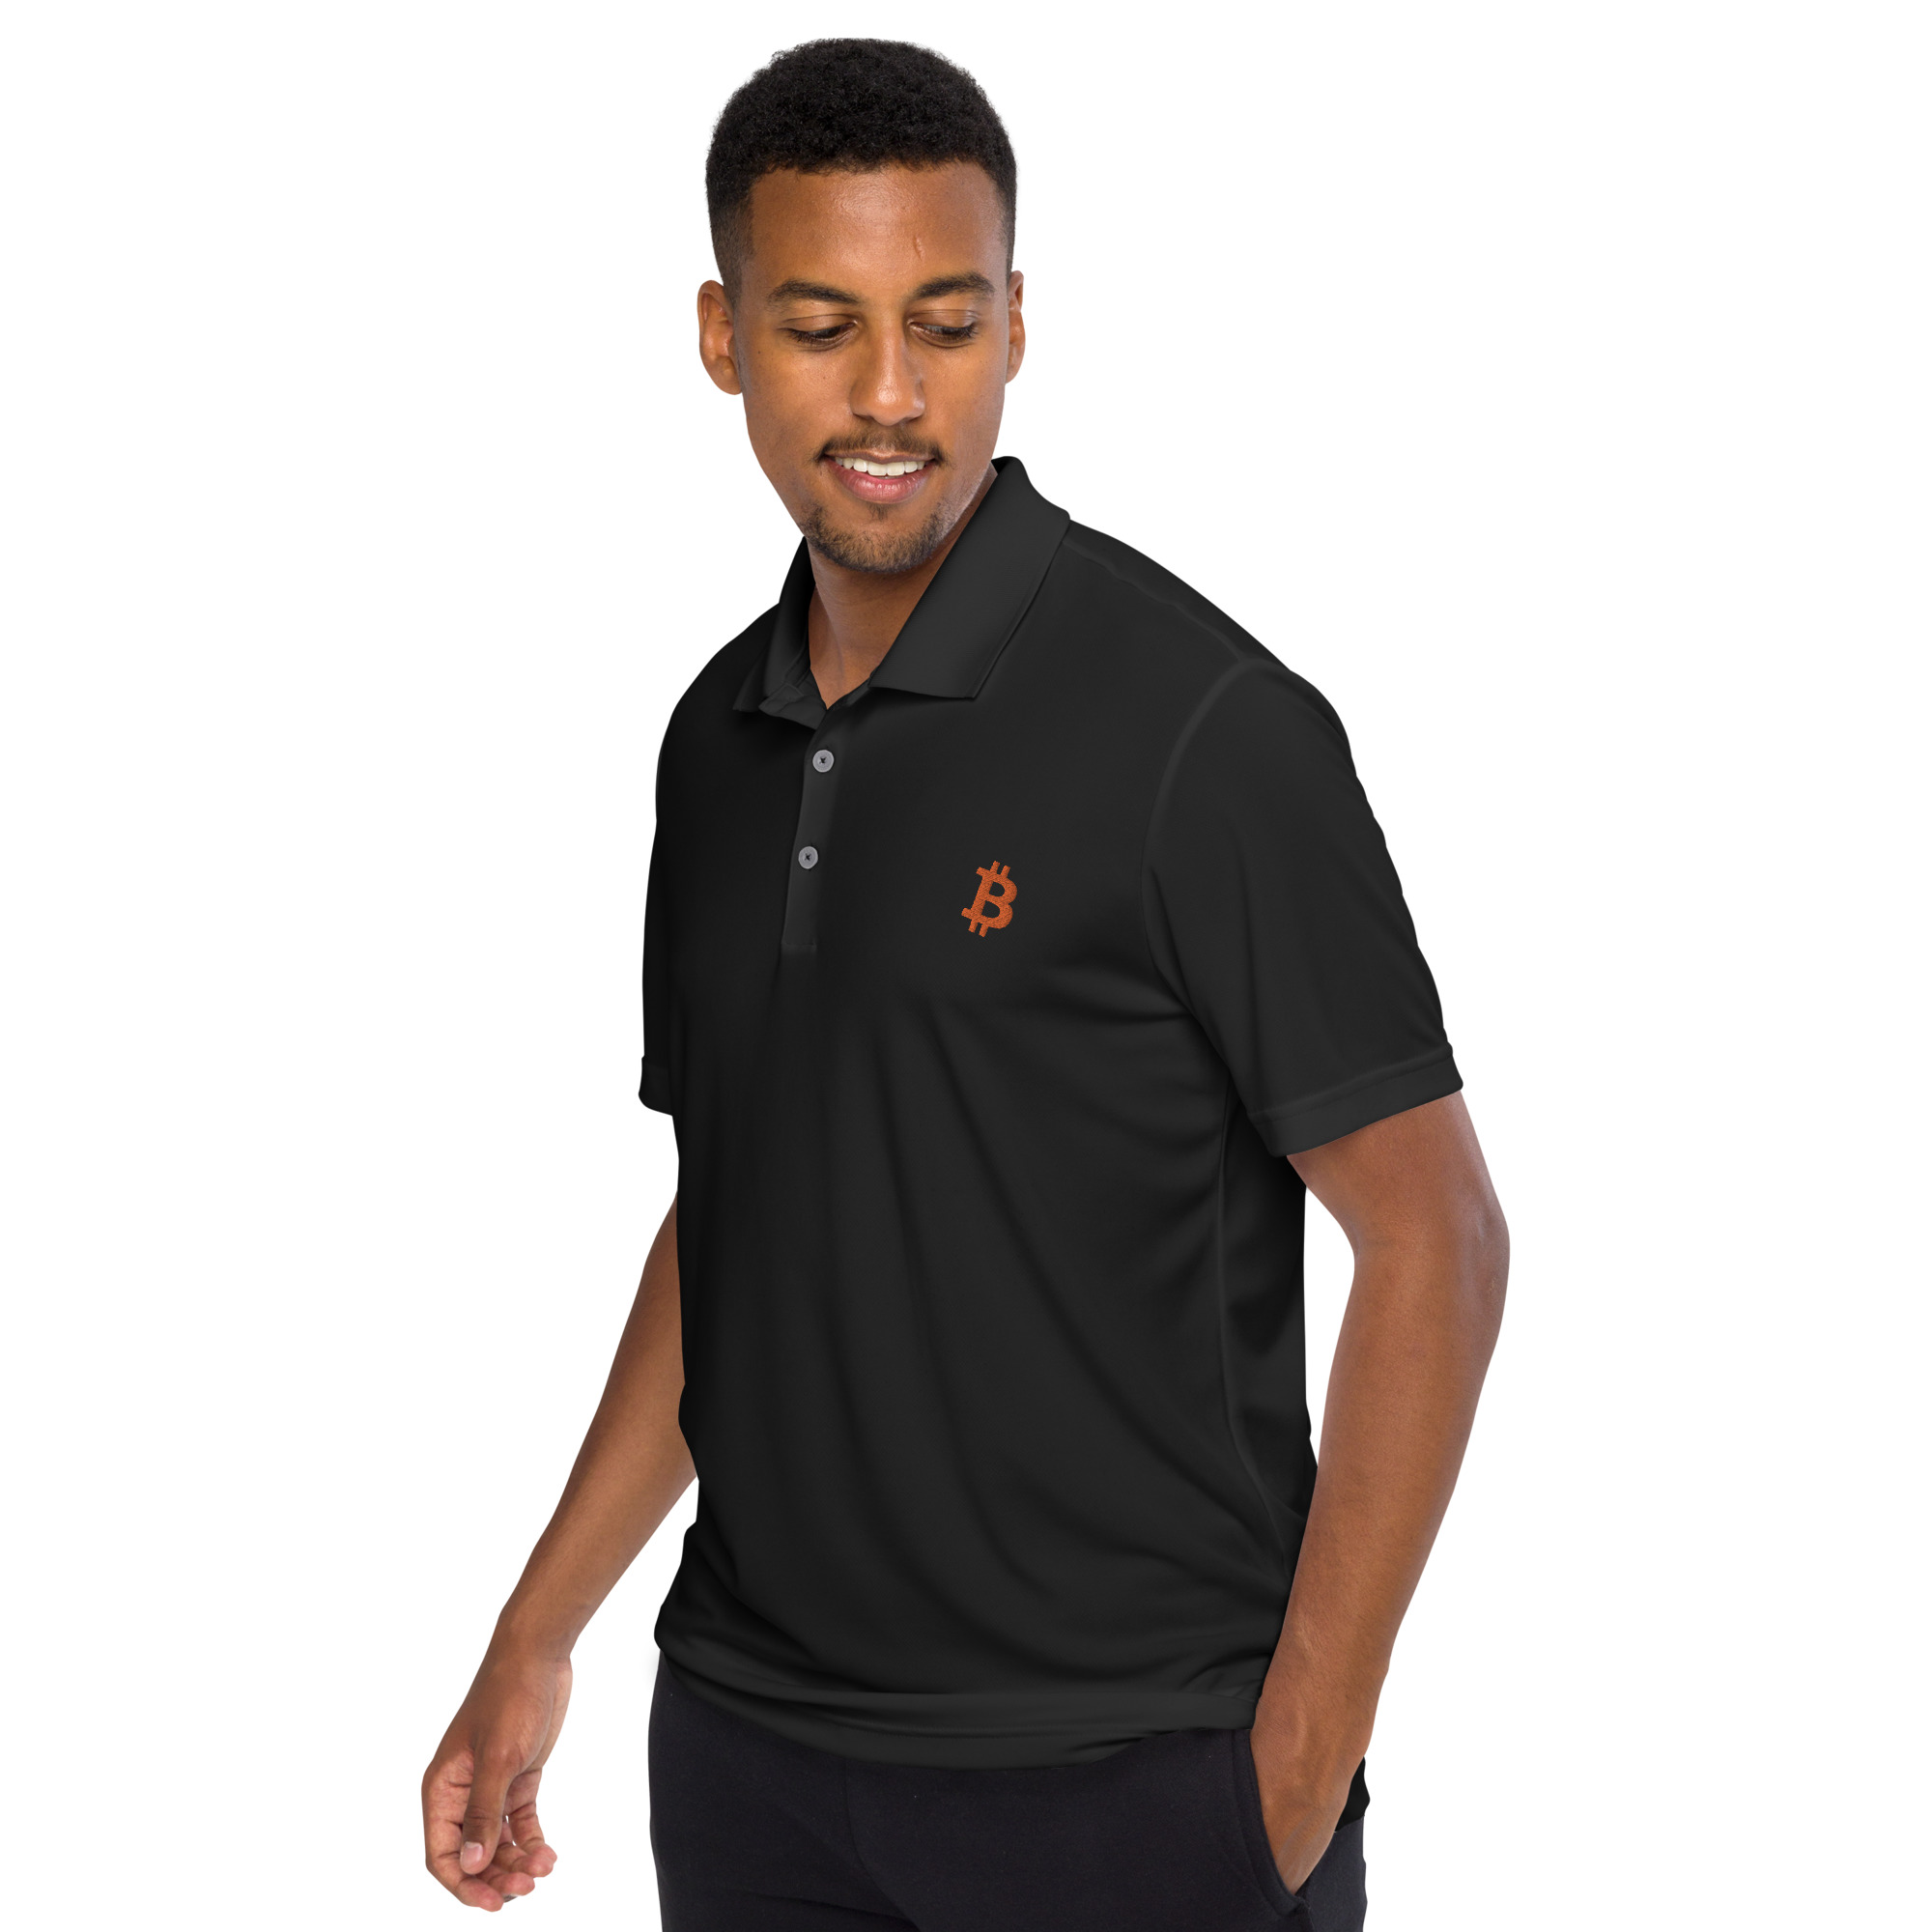 side angle of a person wearing black bitcoin adidas polo shirt